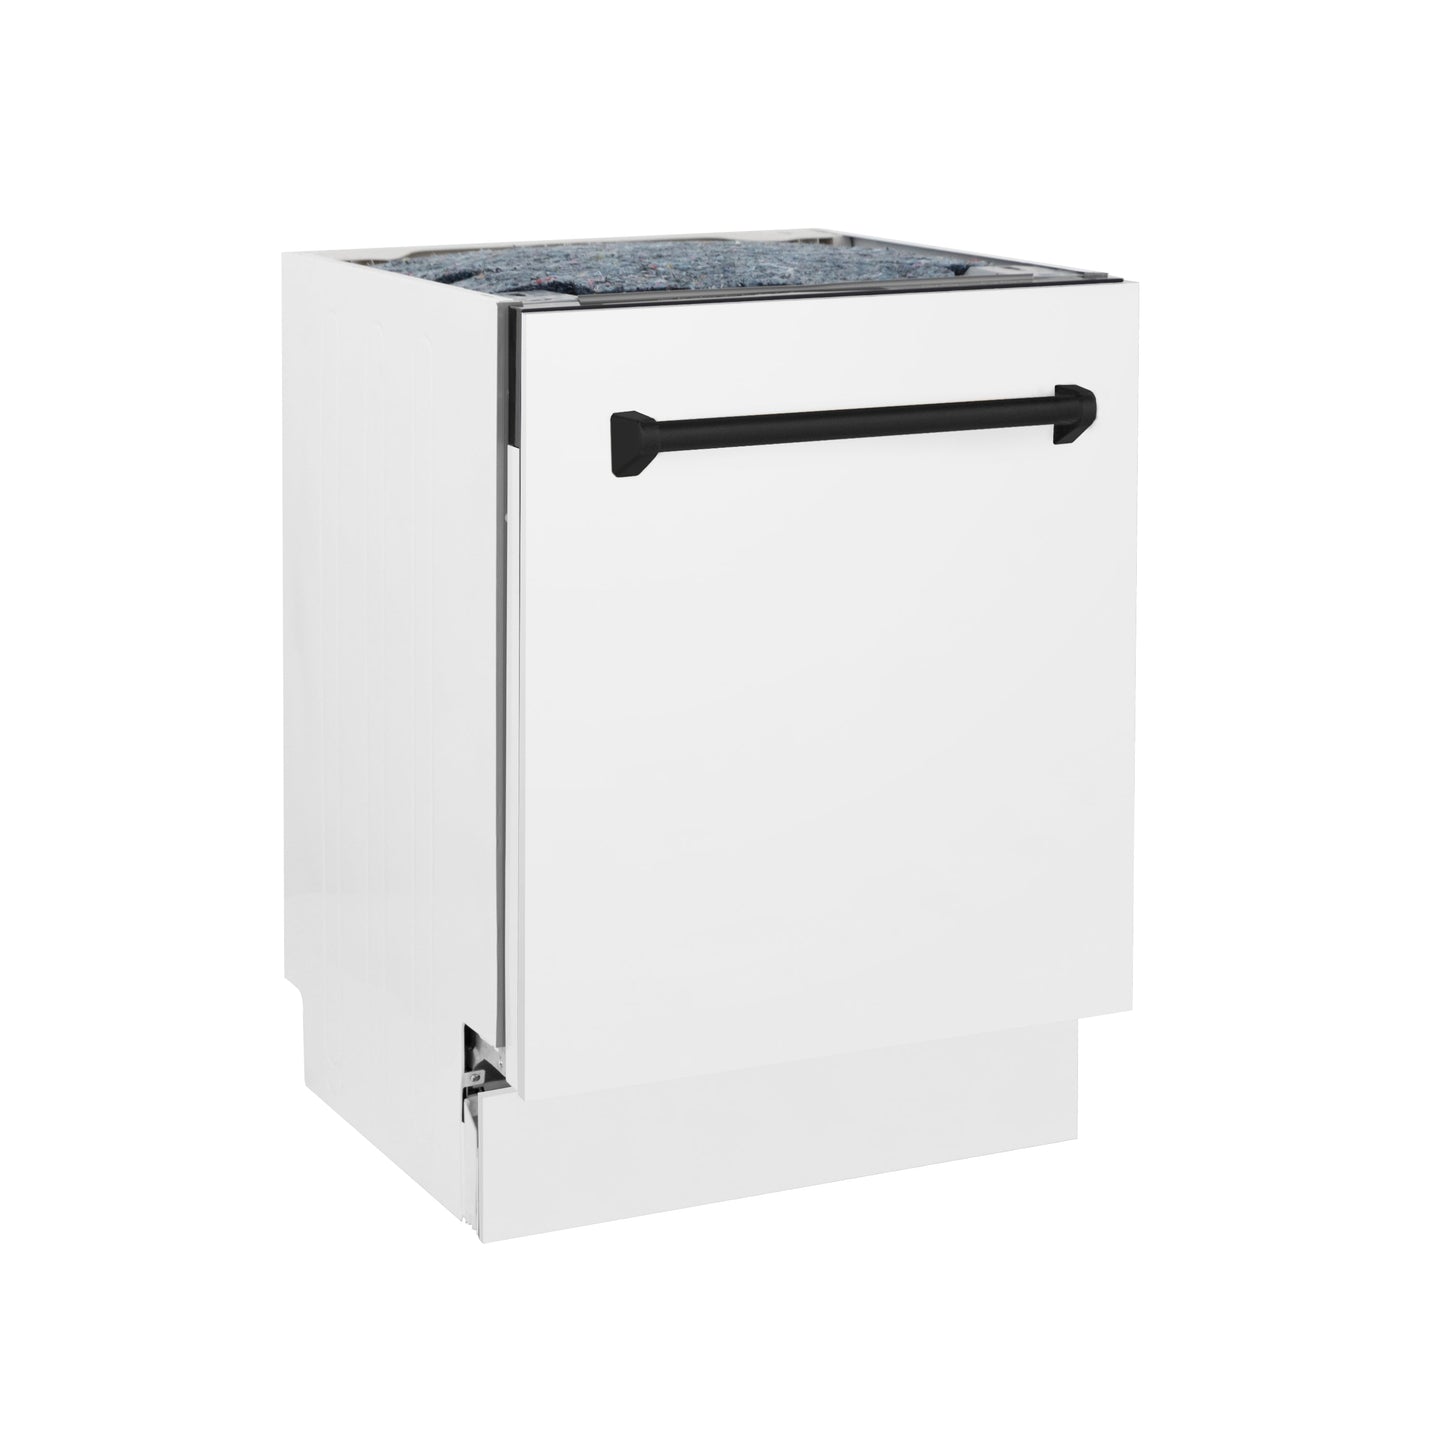 ZLINE Autograph Edition 24 in. 3rd Rack Top Control Tall Tub Dishwasher in White Matte with Matte Black Accent Handle, 51dBa (DWVZ-WM-24-MB)